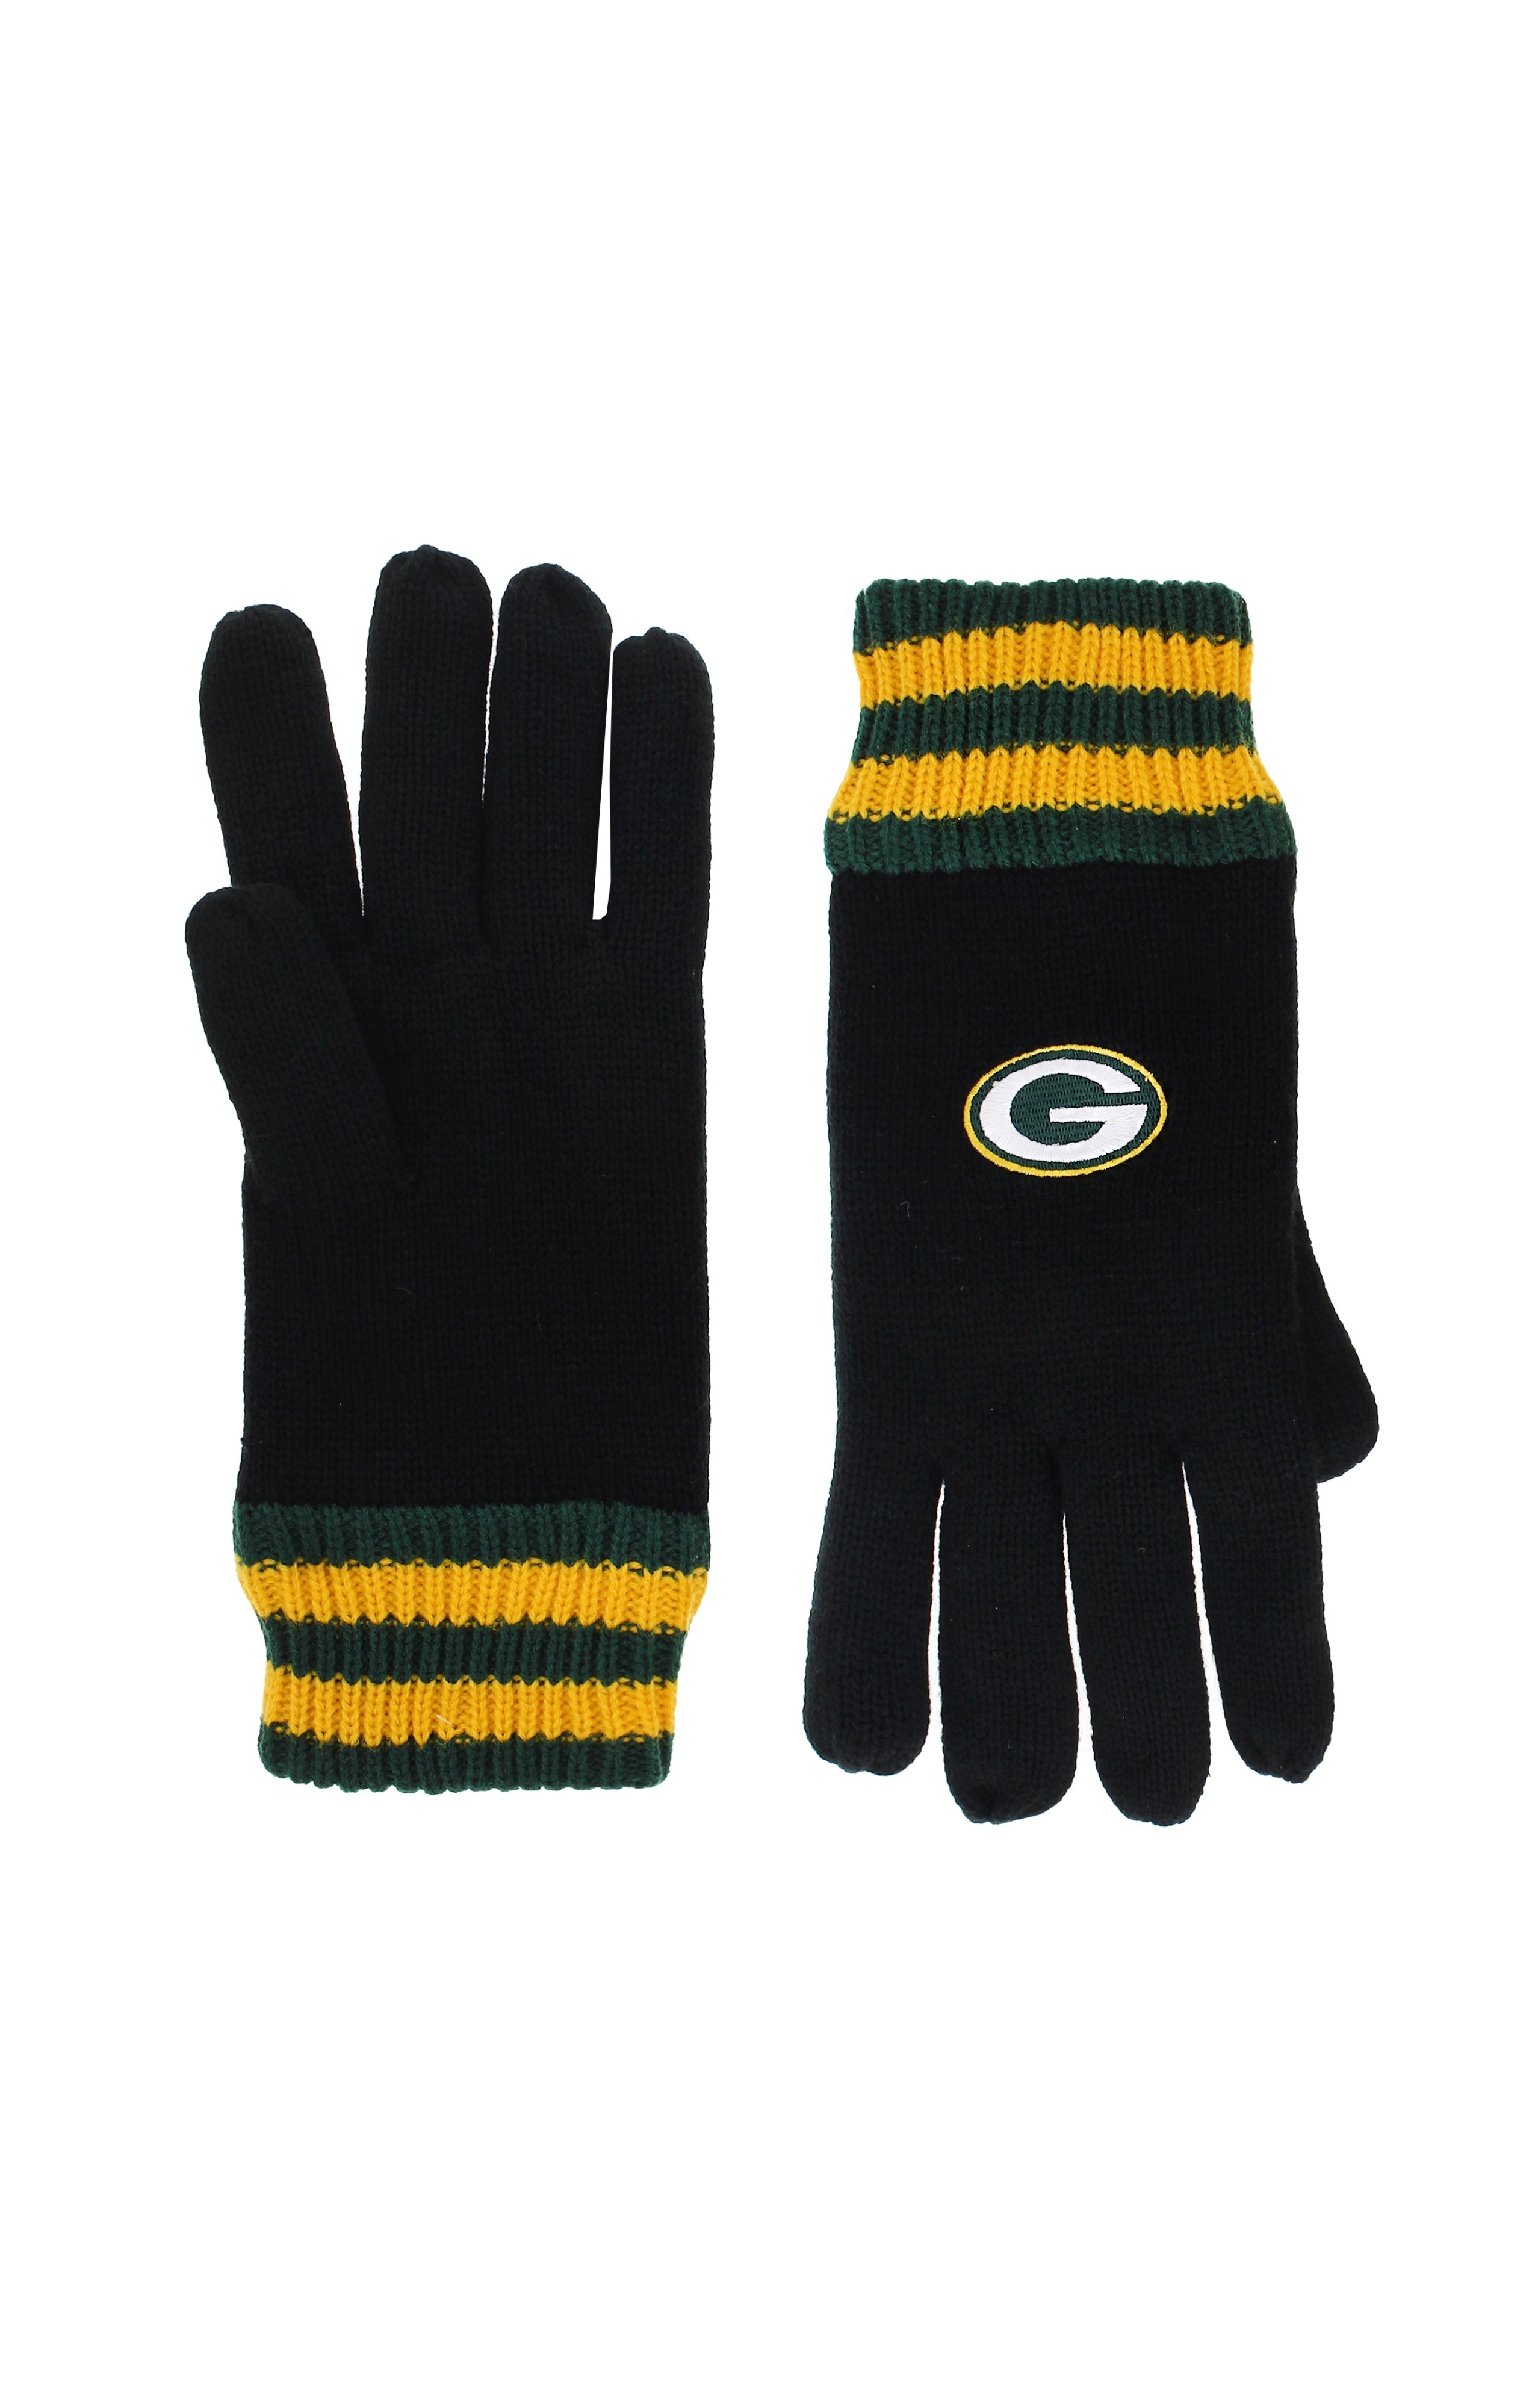 NFL Insulated Thermal Men's Adult Winter Gloves